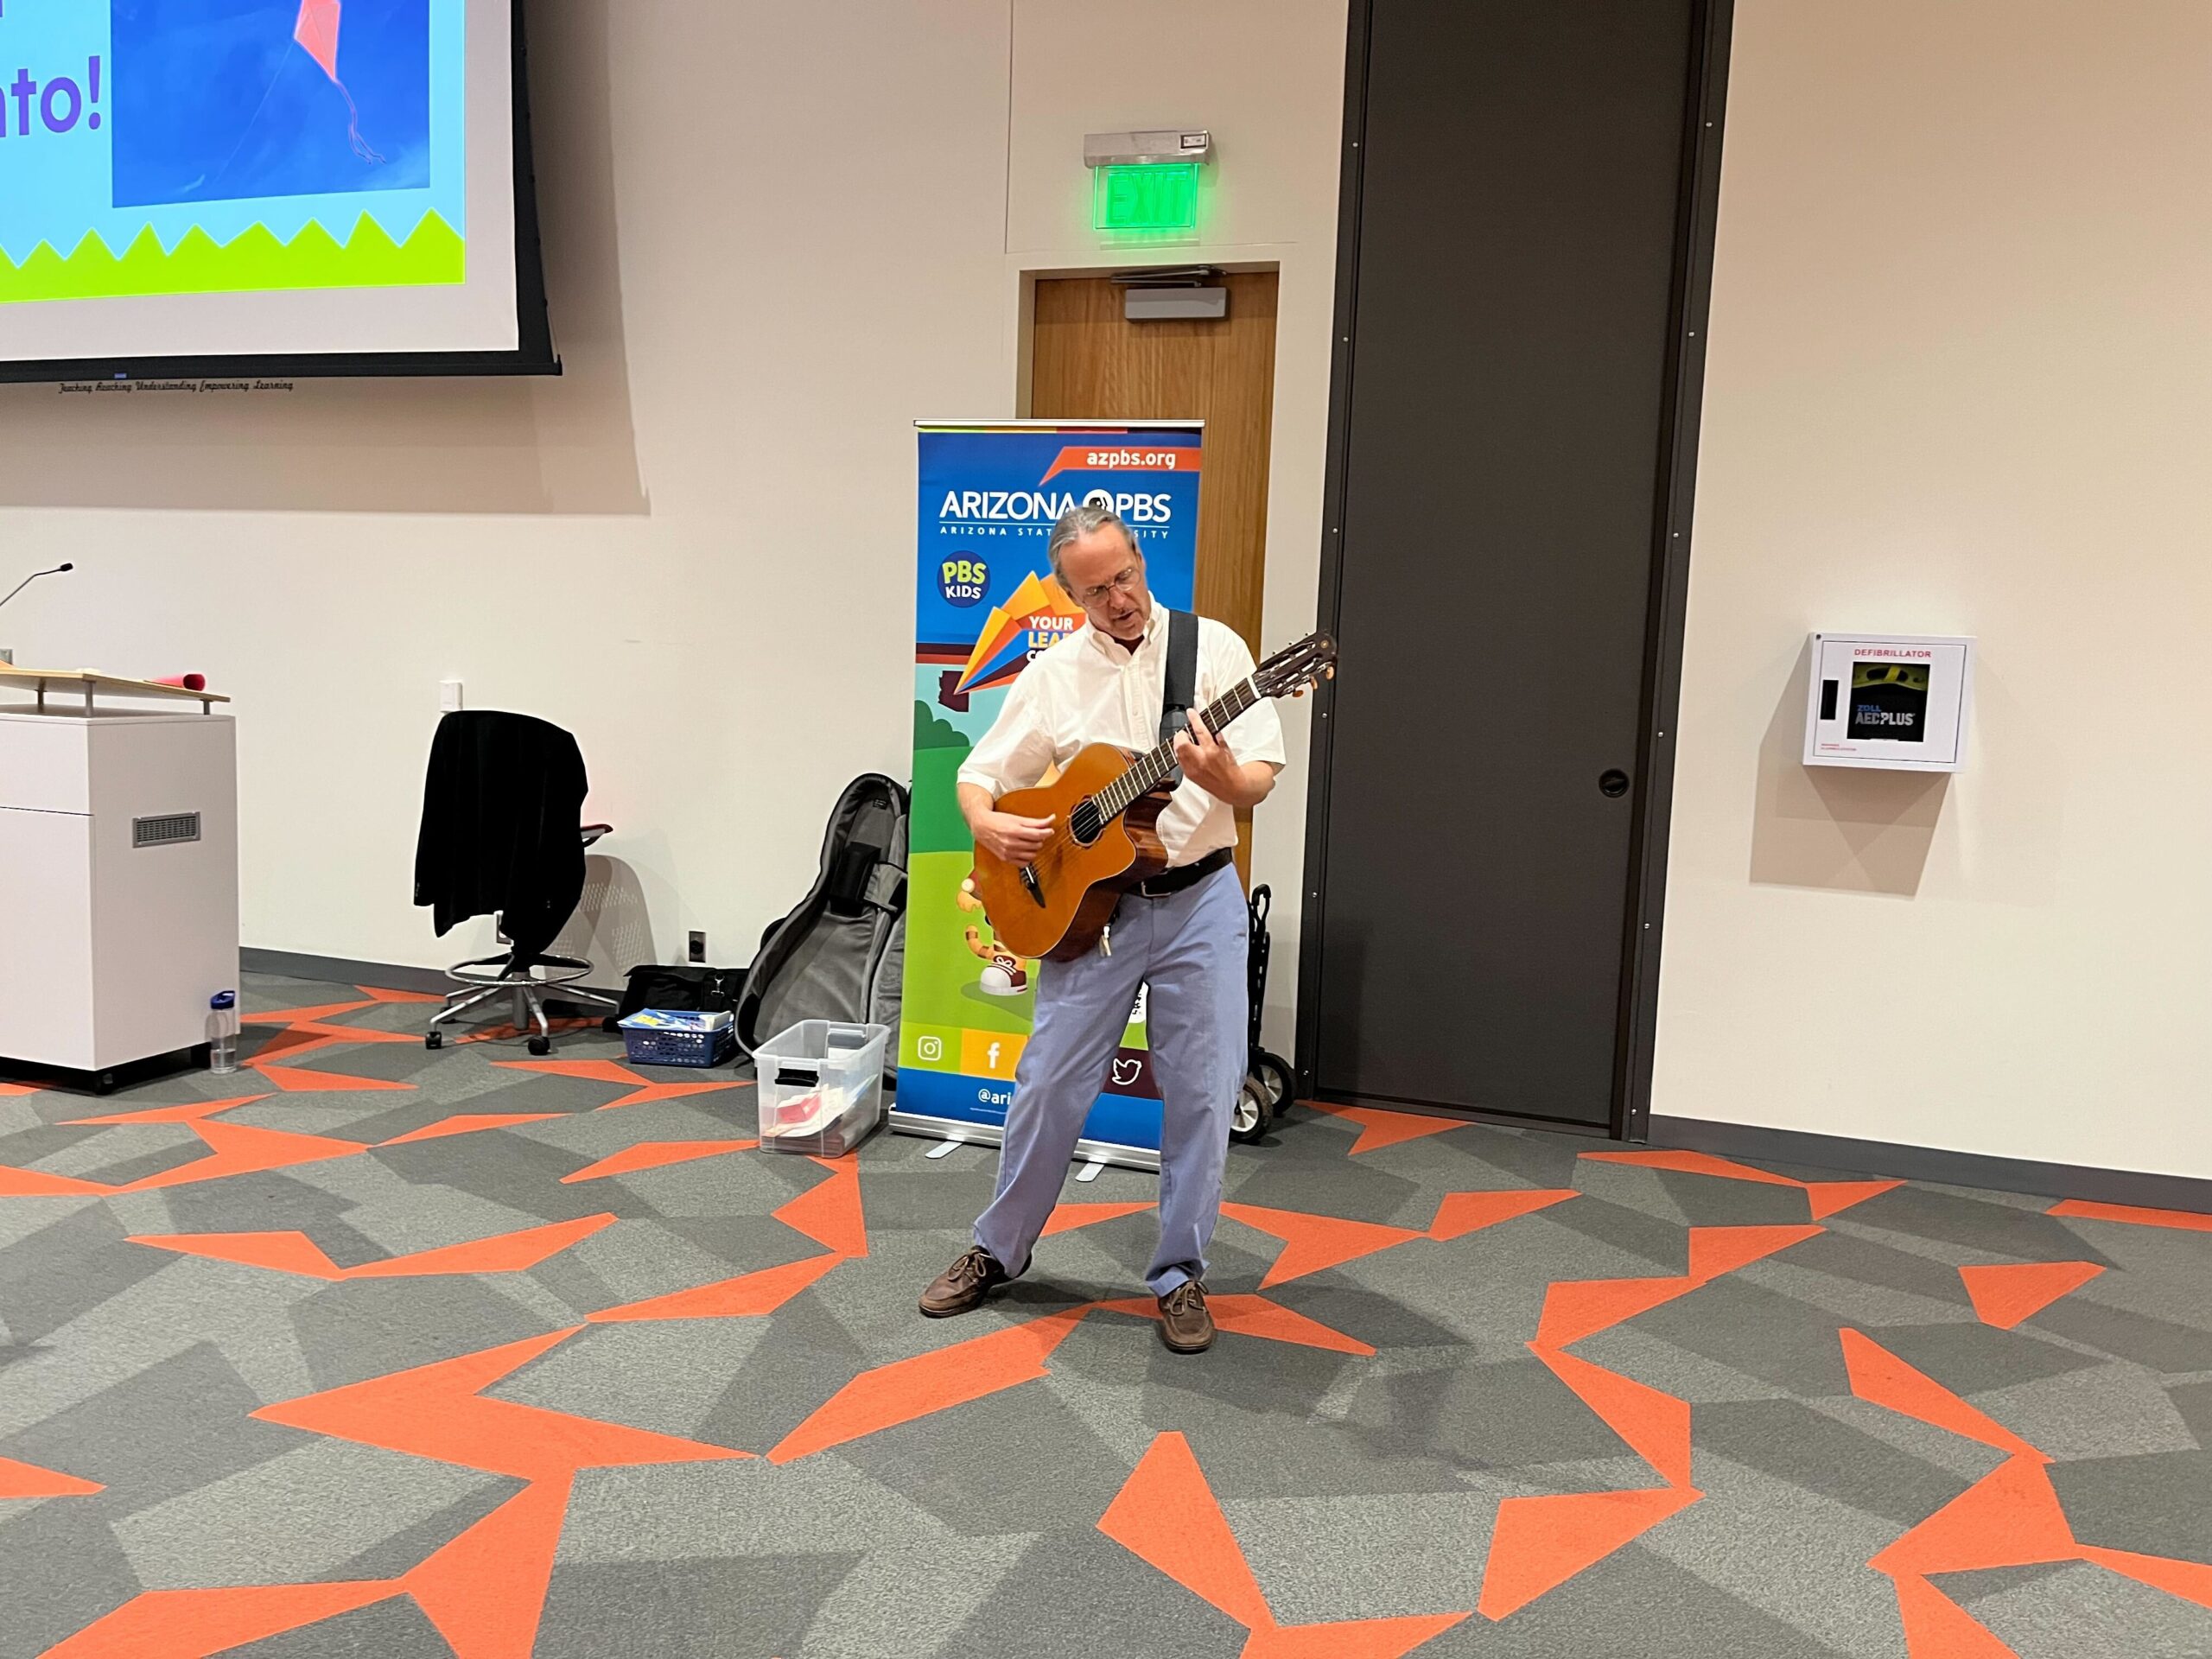 Gordon plays guitar and sings at an AZPBS Family Math event